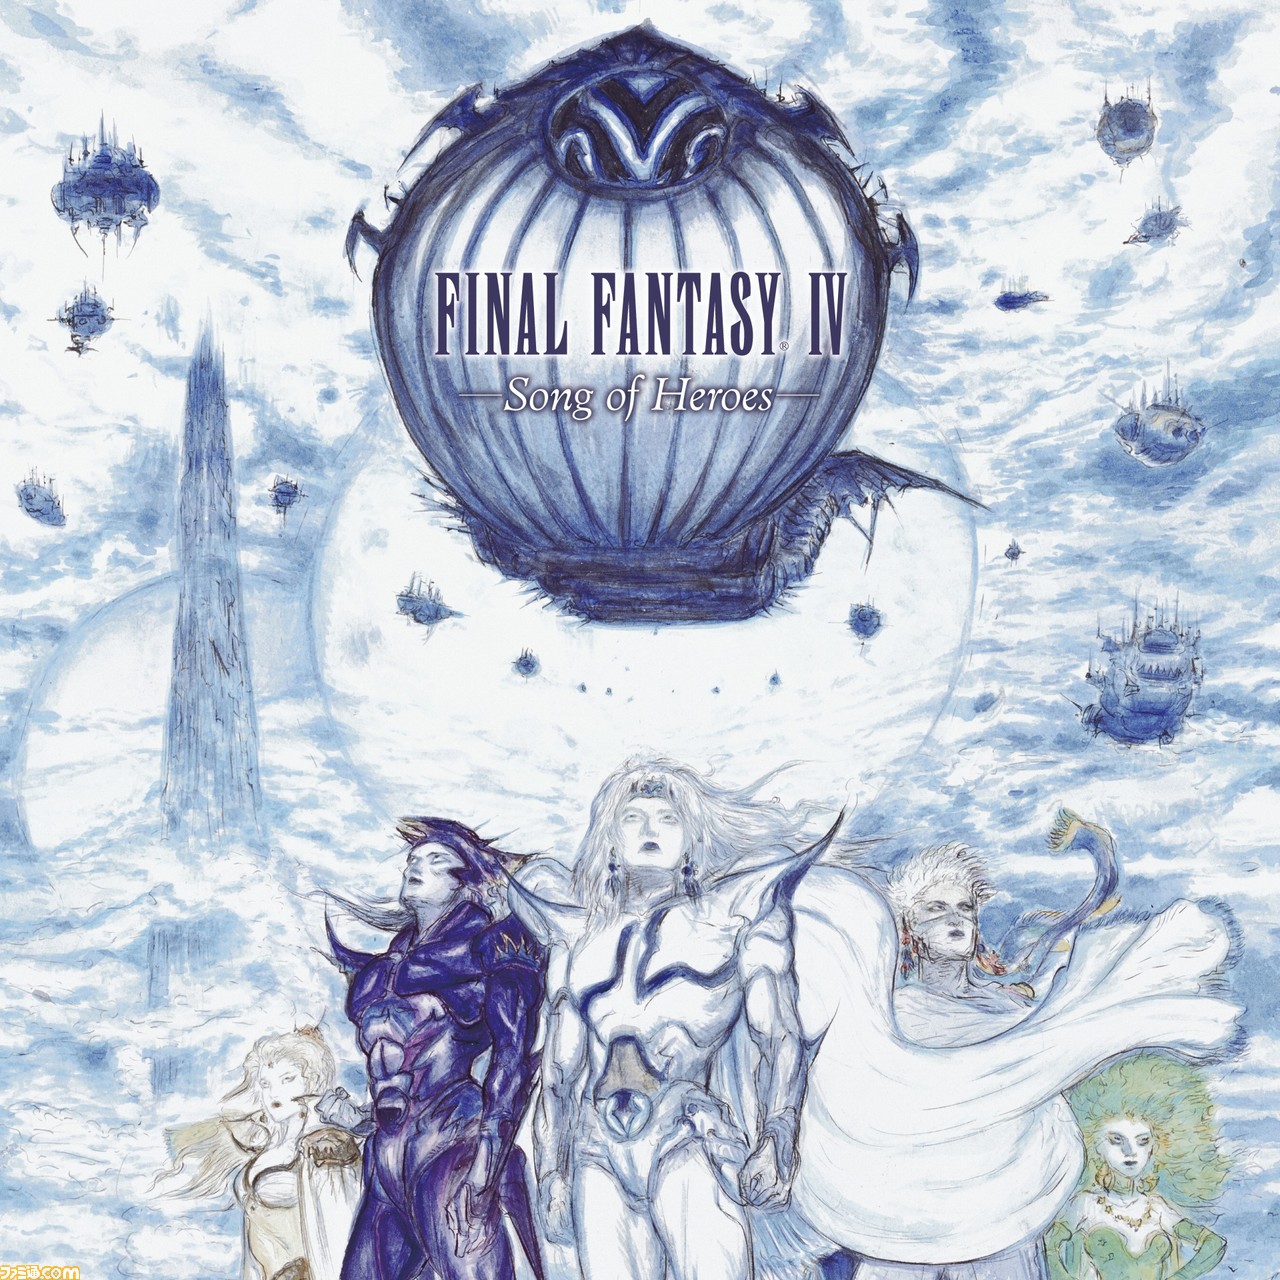 FF4』30周年記念アナログレコード盤『FINAL FANTASY IV -Song of